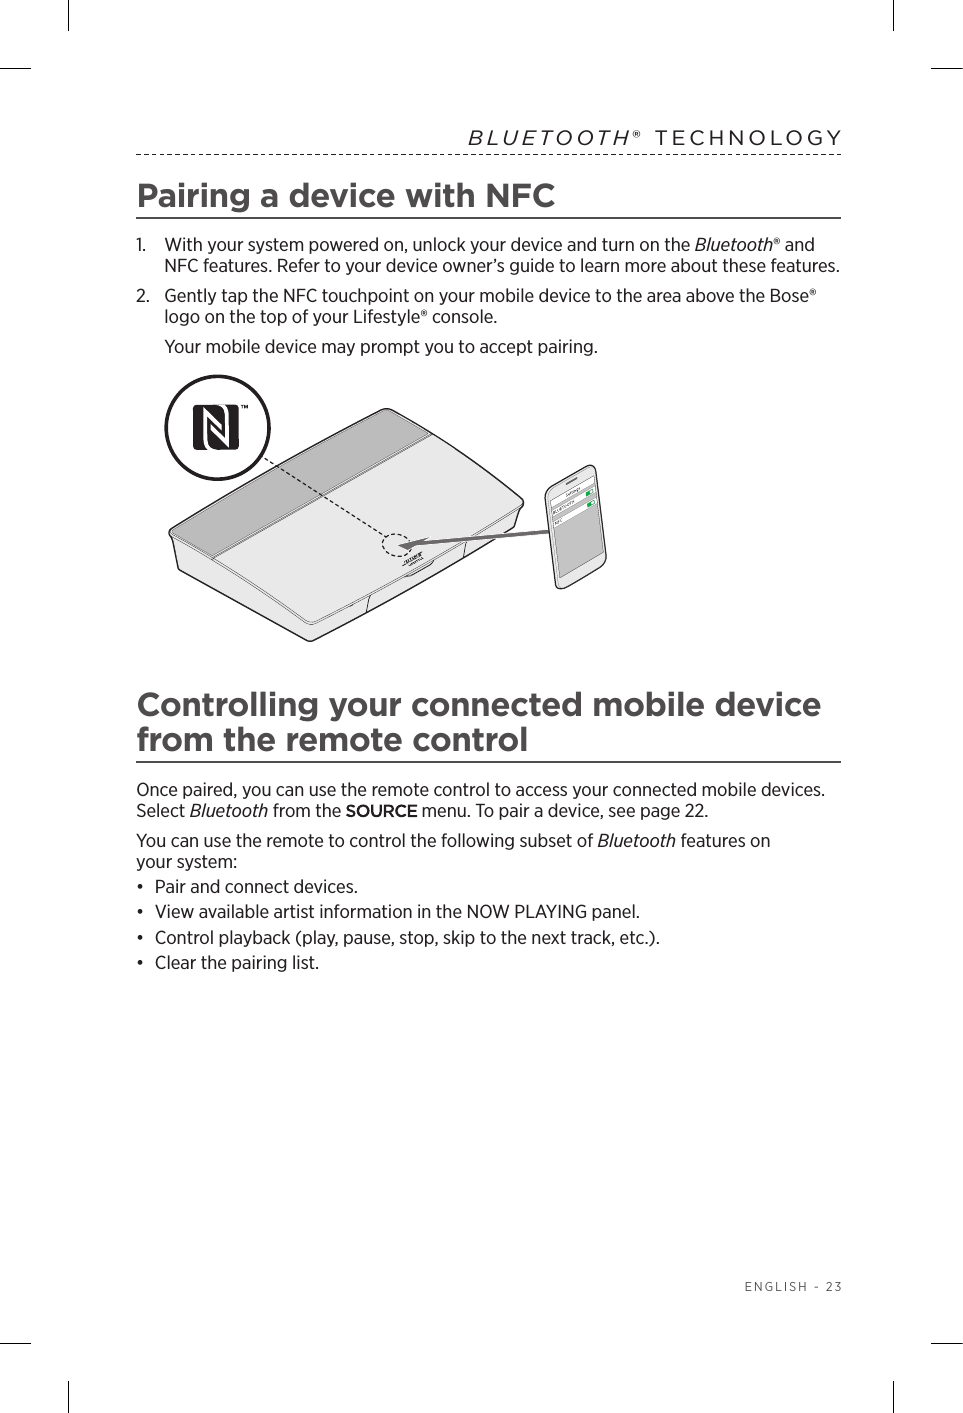  ENGLISH - 23BLUETOOTH® TECHNOLOGYPairing a device with NFC1.  With your system powered on, unlock your device and turn on the  Bluetooth® and NFC features. Refer to your device owner’s guide to learn more about these features.2.  Gently tap the NFC touchpoint on your mobile device to the area above the Bose® logo on the top of your Lifestyle® console. Your mobile device may prompt you to accept pairing. Controlling your connected mobile device from the remote controlOnce paired, you can use the remote control to access your connected mobile  devices. Select Bluetooth from the   menu. To pair a device, see page 22.You can use the remote to control the following subset of Bluetooth features on  your system:•  Pair and connect devices.•  View available artist information in the NOW PLAYING panel.•  Control playback (play, pause, stop, skip to the next track, etc.).•  Clear the pairing list.